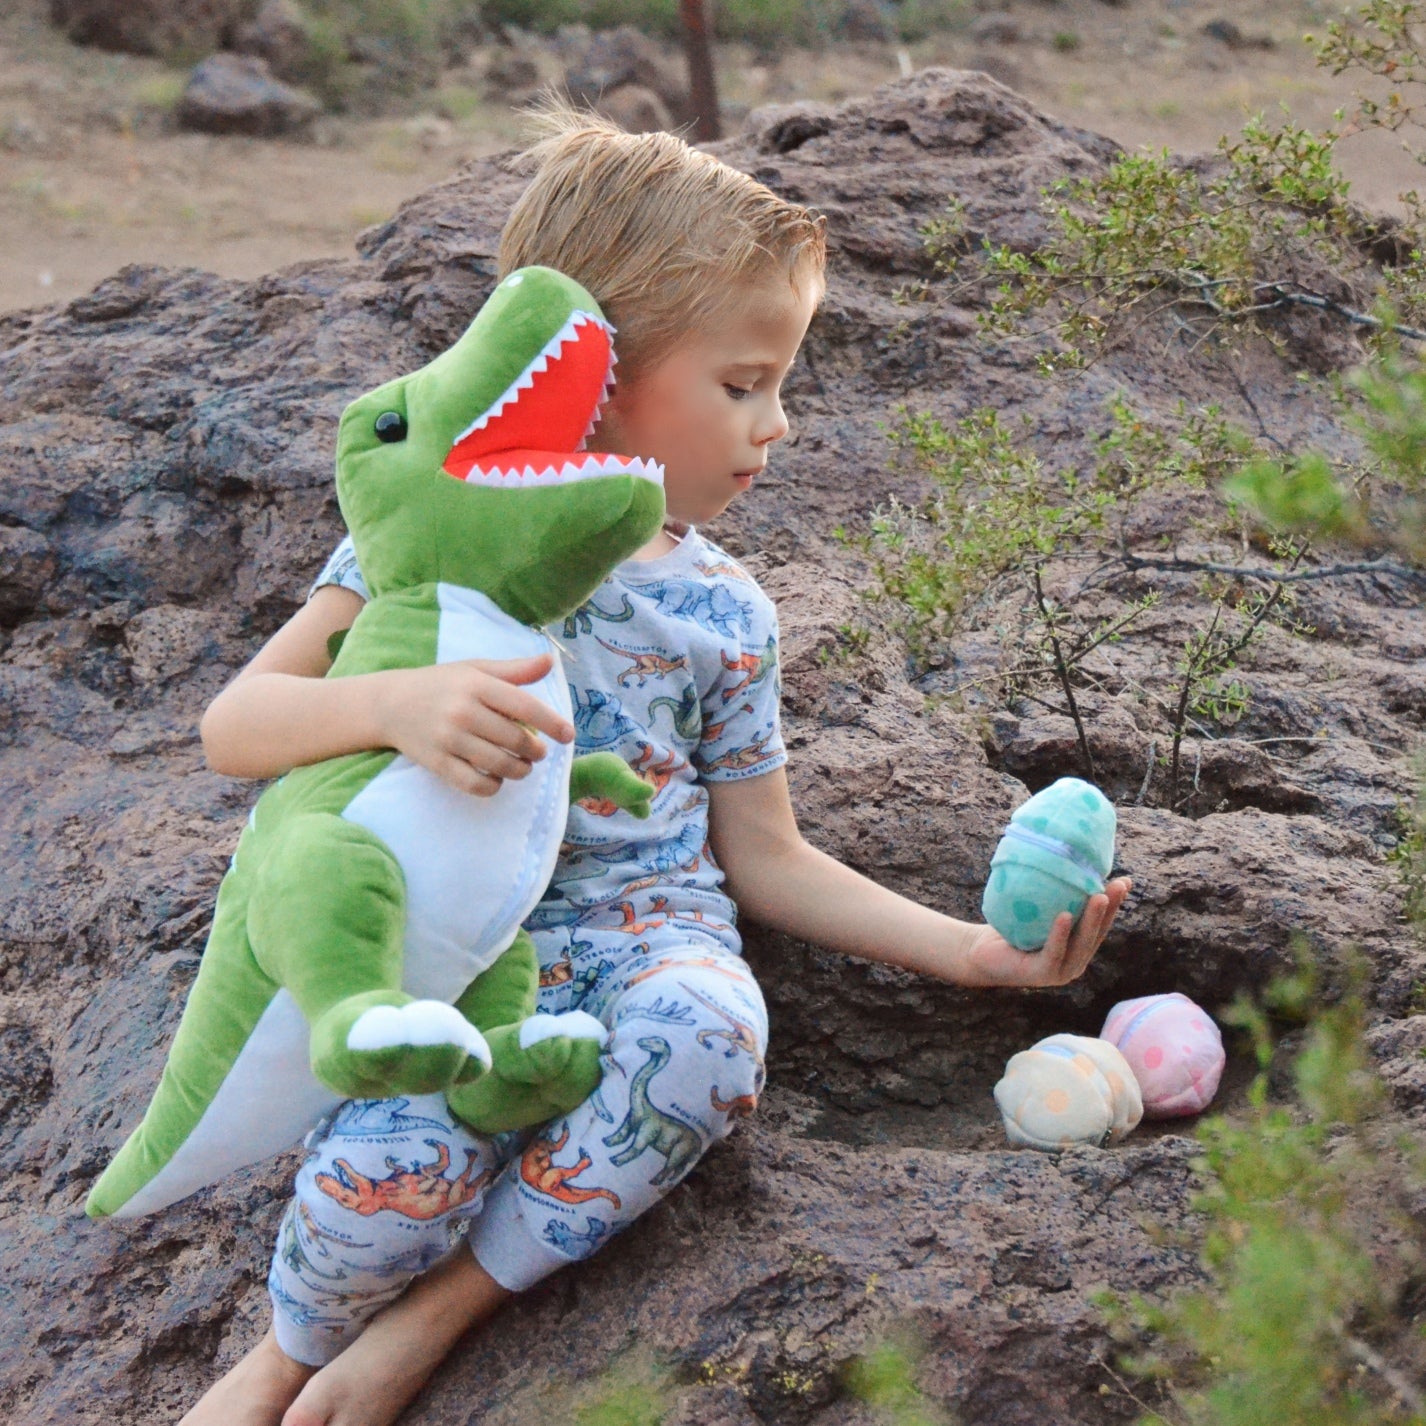 Dinosaur Stuffed Toy with 3 Baby Dinosaurs, Green/Pink, 23.6 Inches